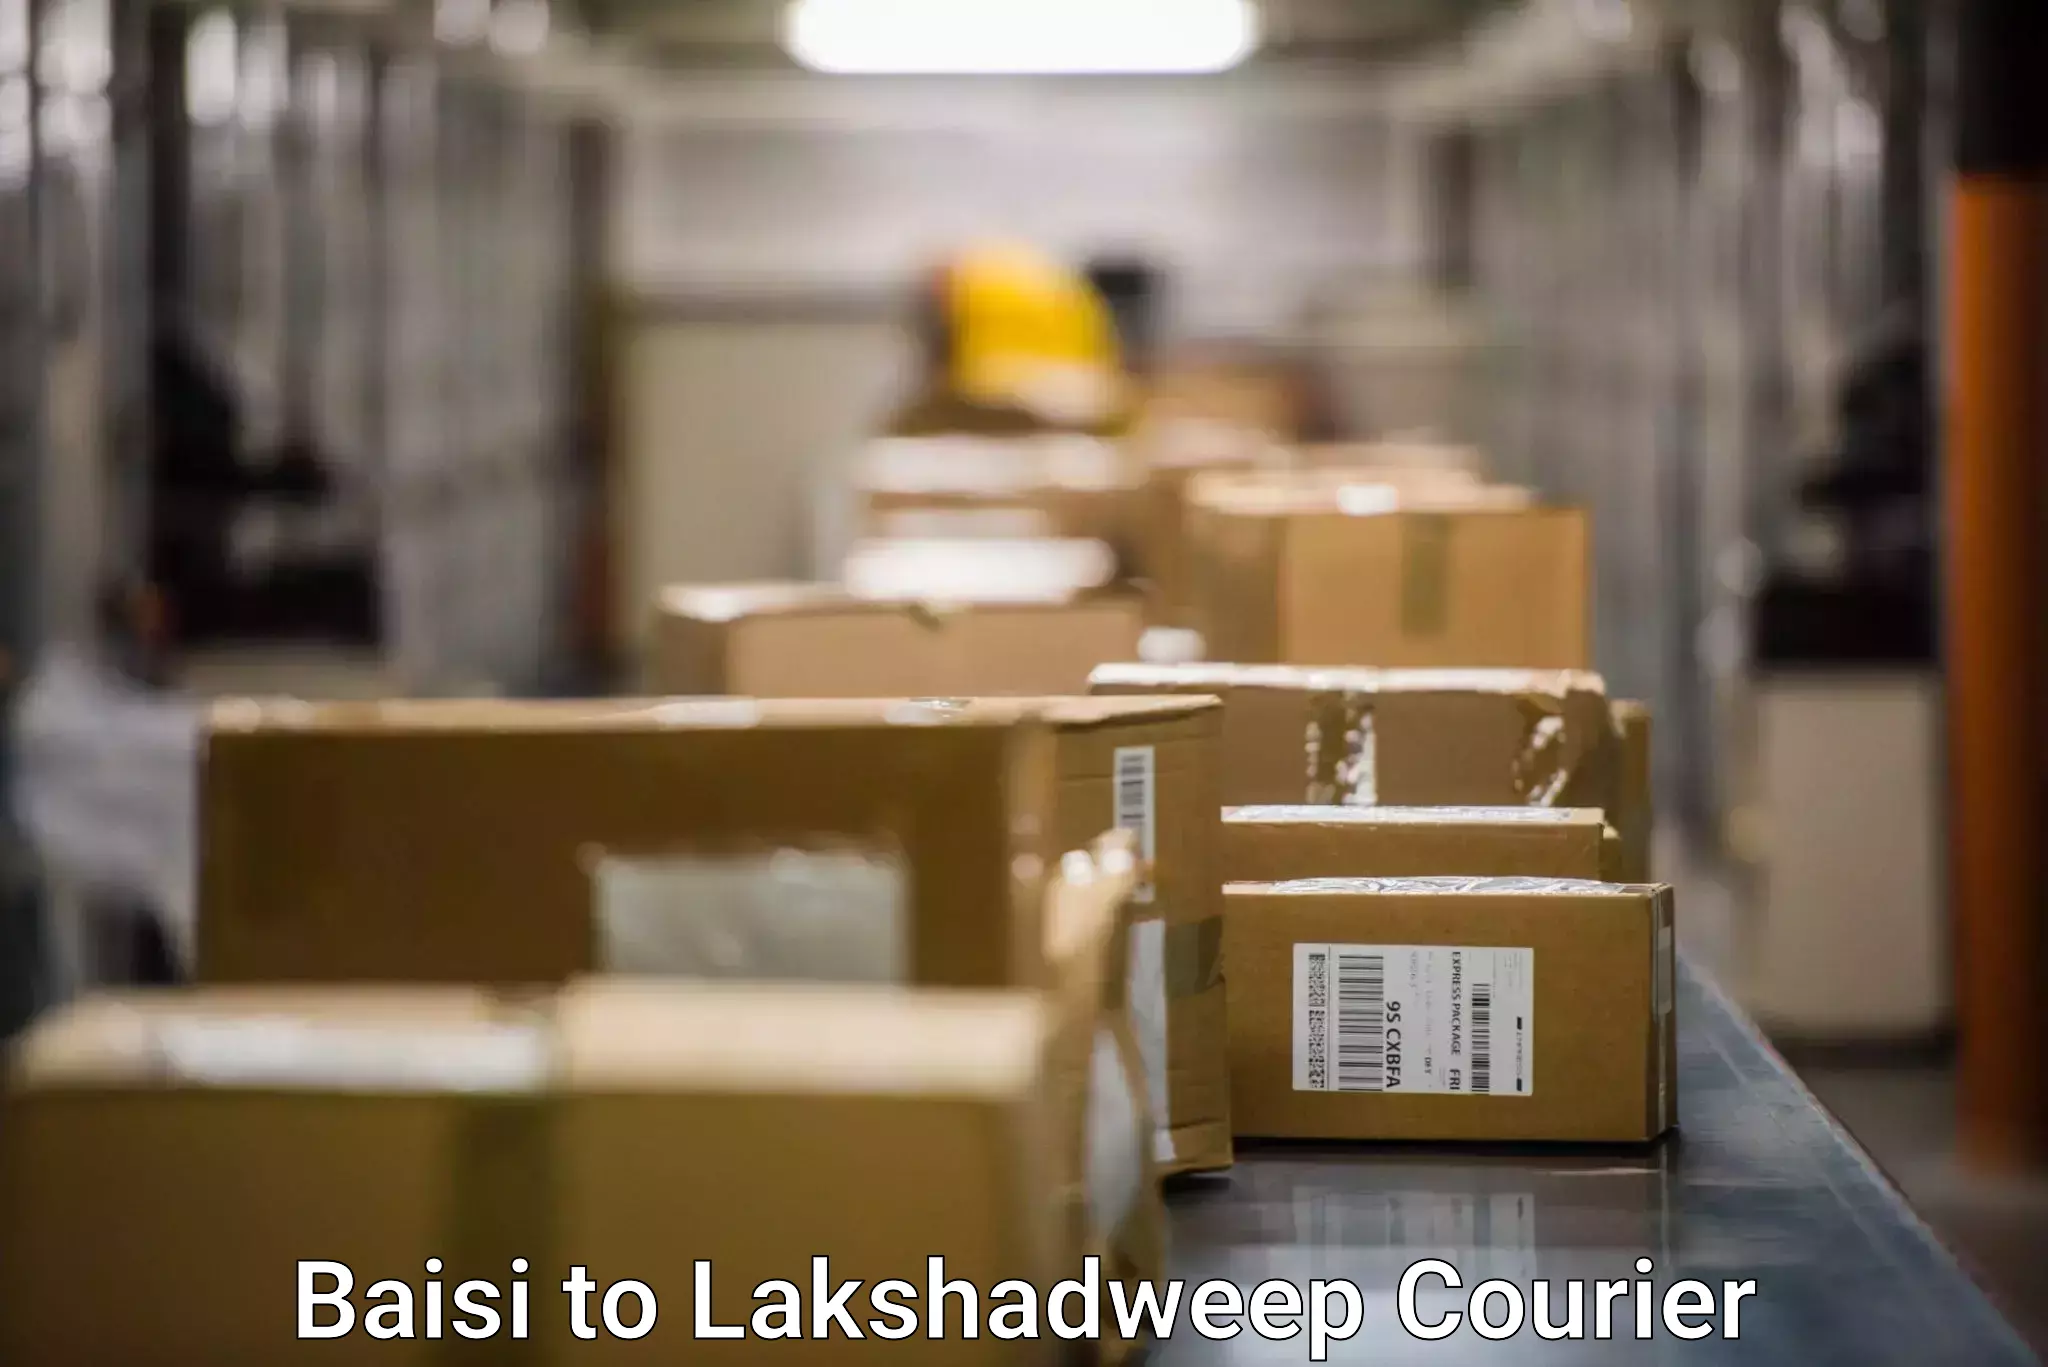 Courier service efficiency Baisi to Lakshadweep